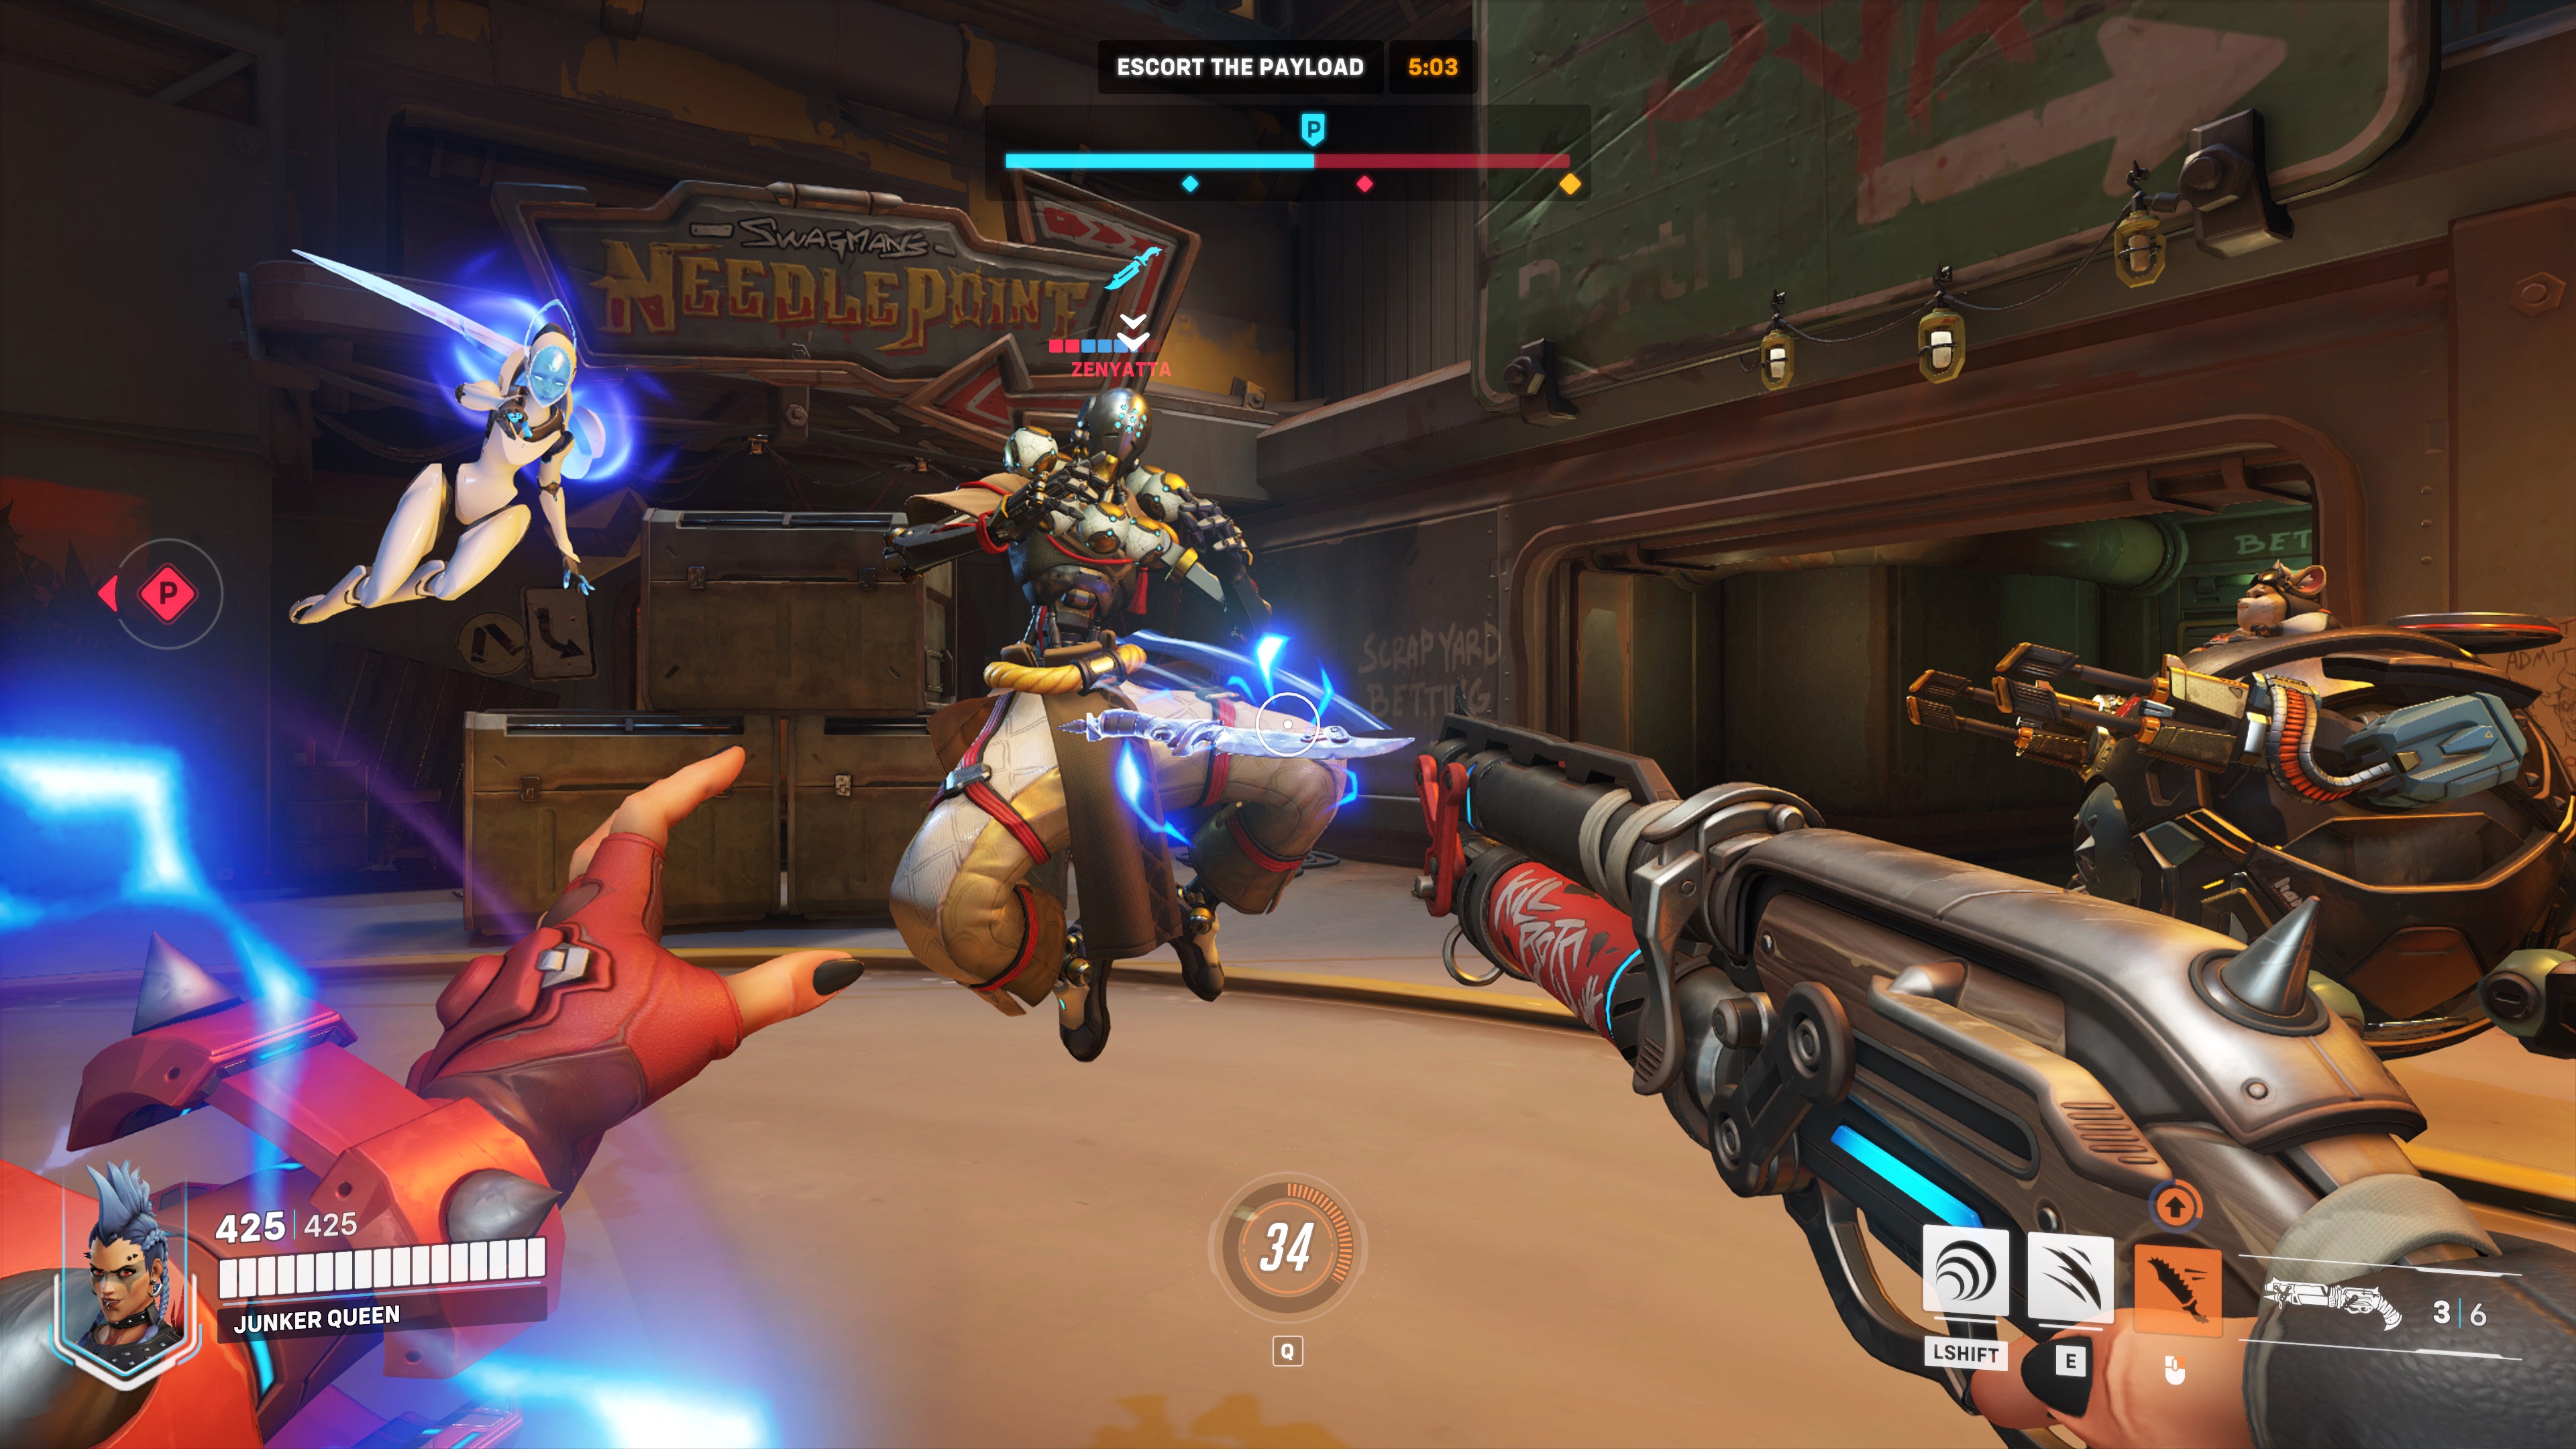 Junker Queen recalls her knife using a magnetic glove as she faces Zenyatta and Echo in Junkertown in a screenshot from Overwatch 2